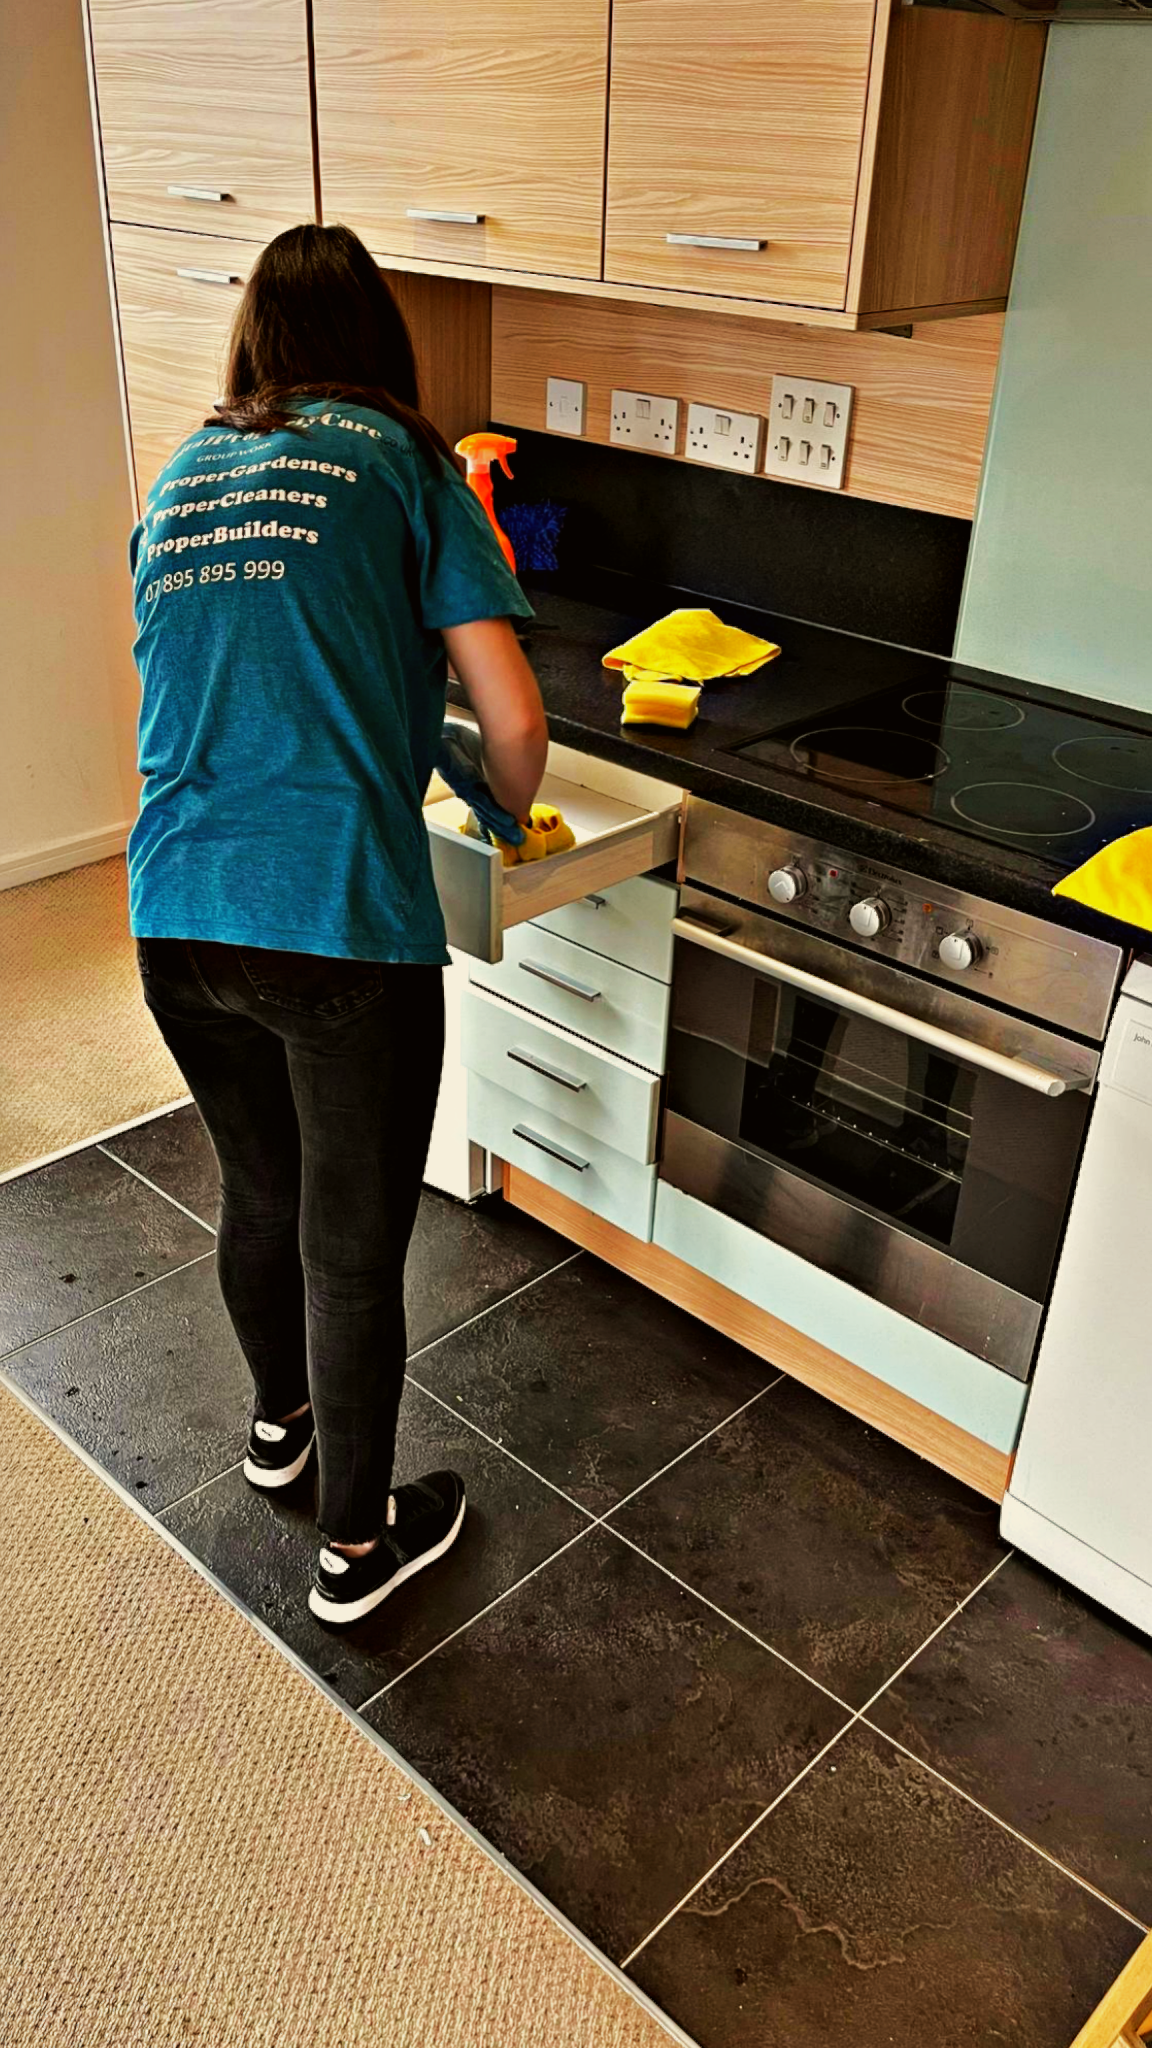 Deep cleaning services in London by Proper Cleaners - Expert cleaning solutions for homes and businesses. Trust us for thorough and meticulous cleaning. #DeepCleaning #LondonCleaners #ProperCleaners"